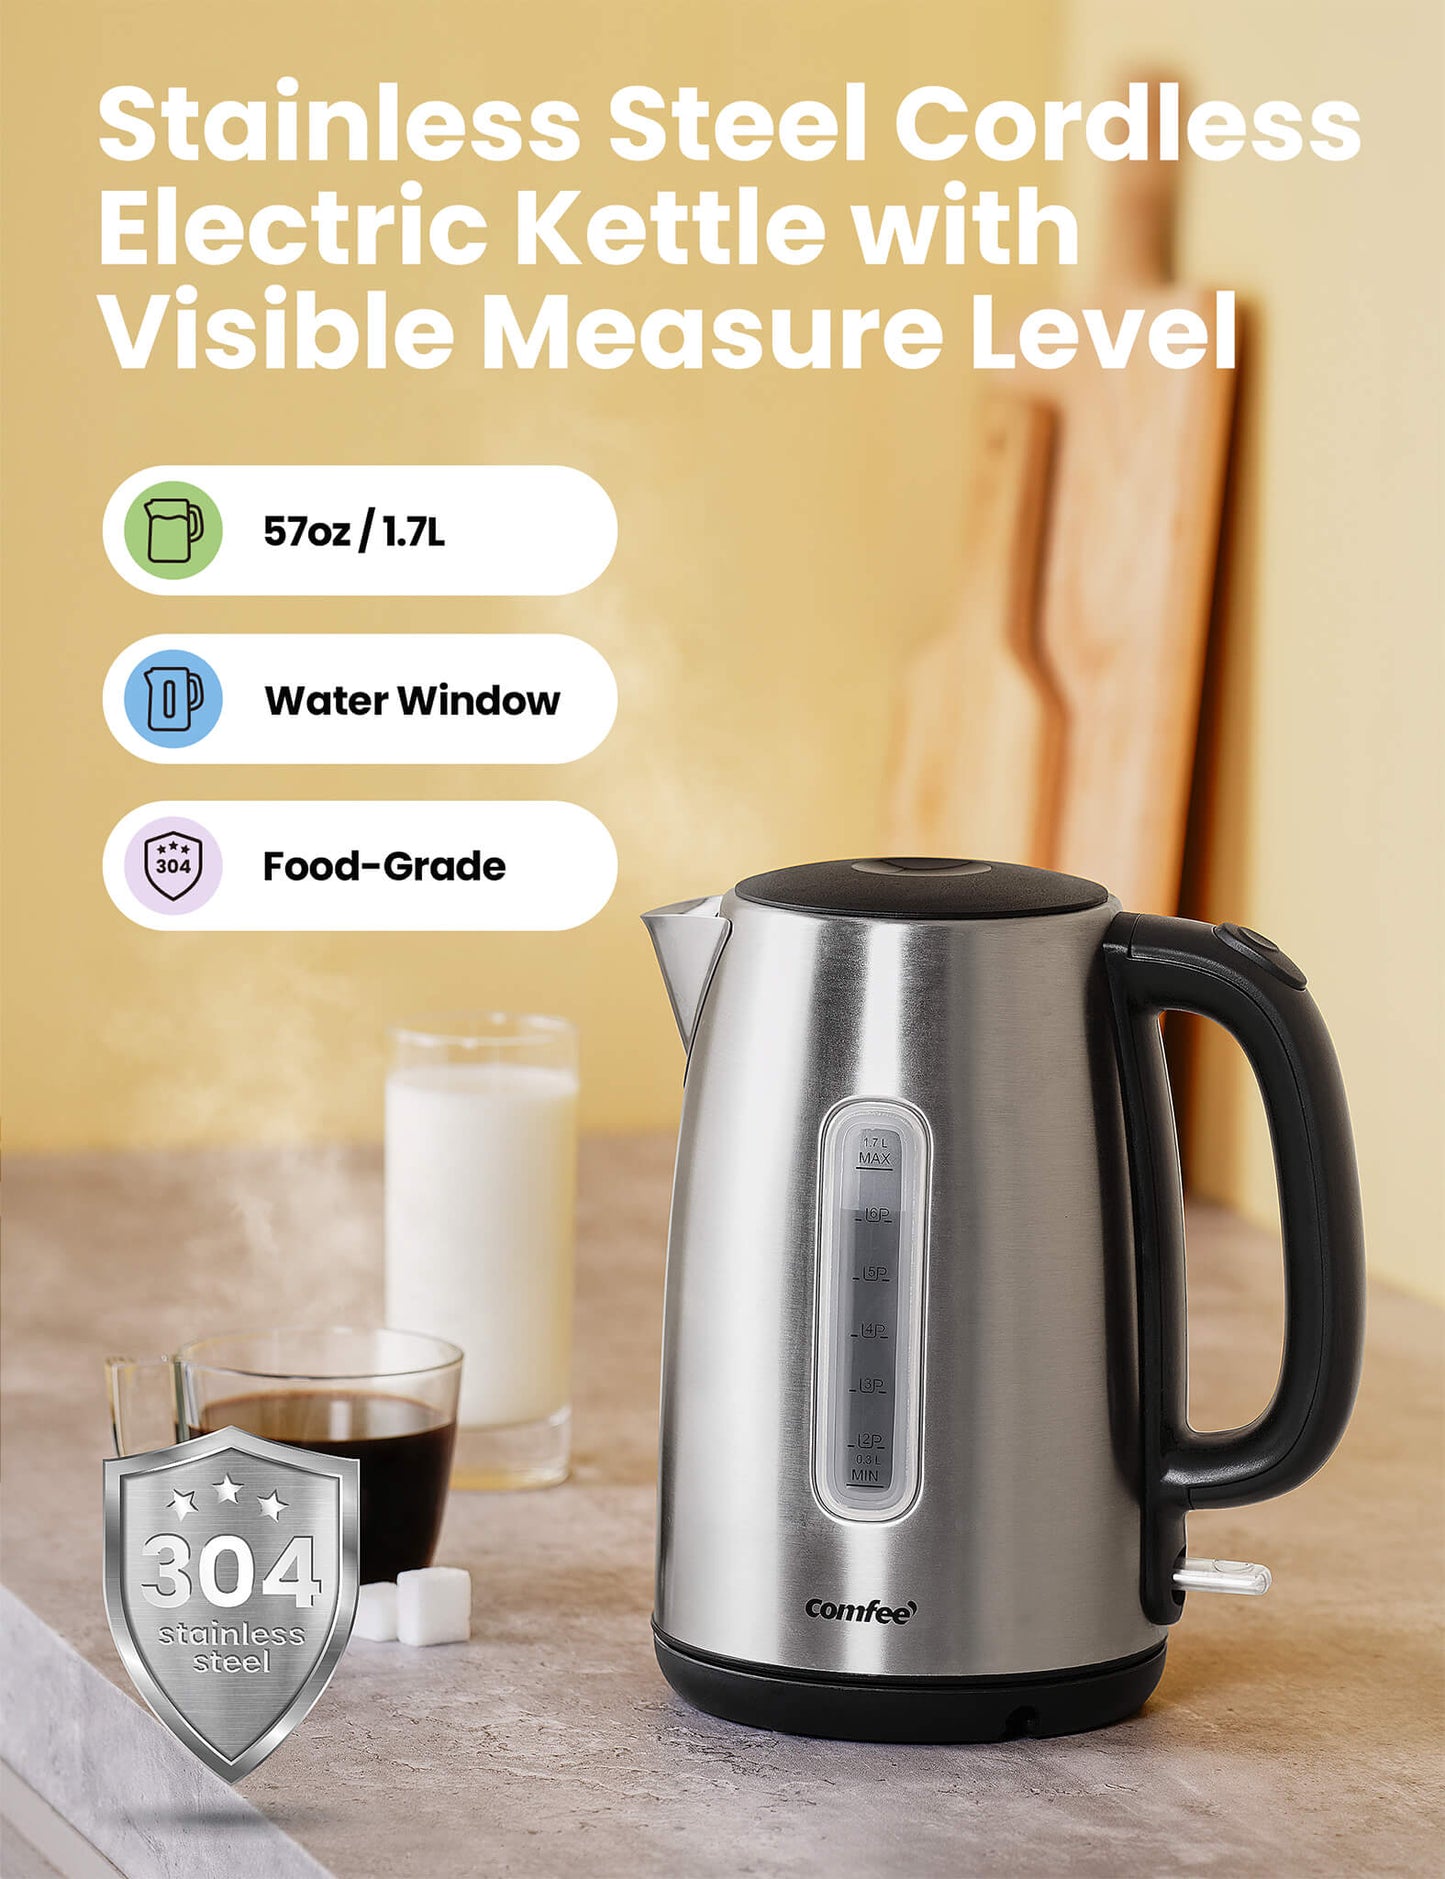 comfee stainless steel electric kettle with visible measure level